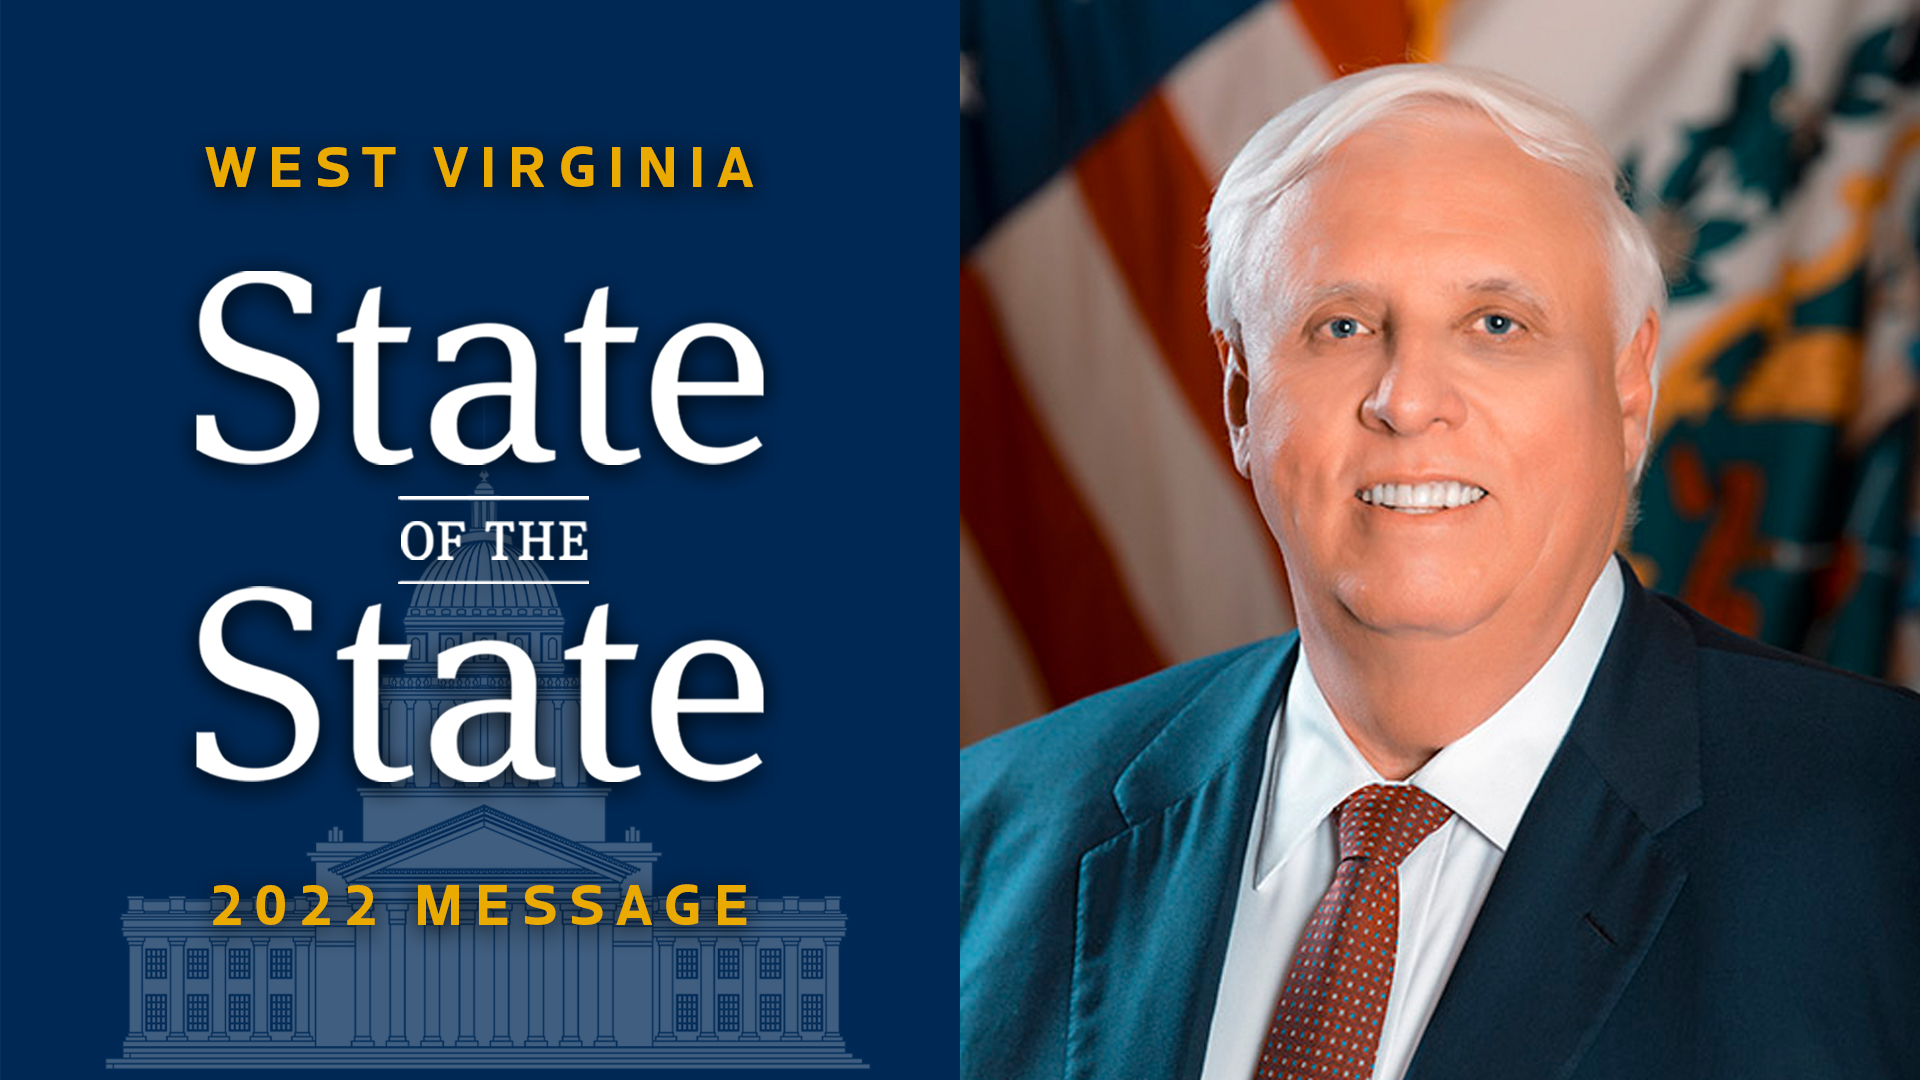 Gov. Justice delivers 2022 State of the State message to Legislature